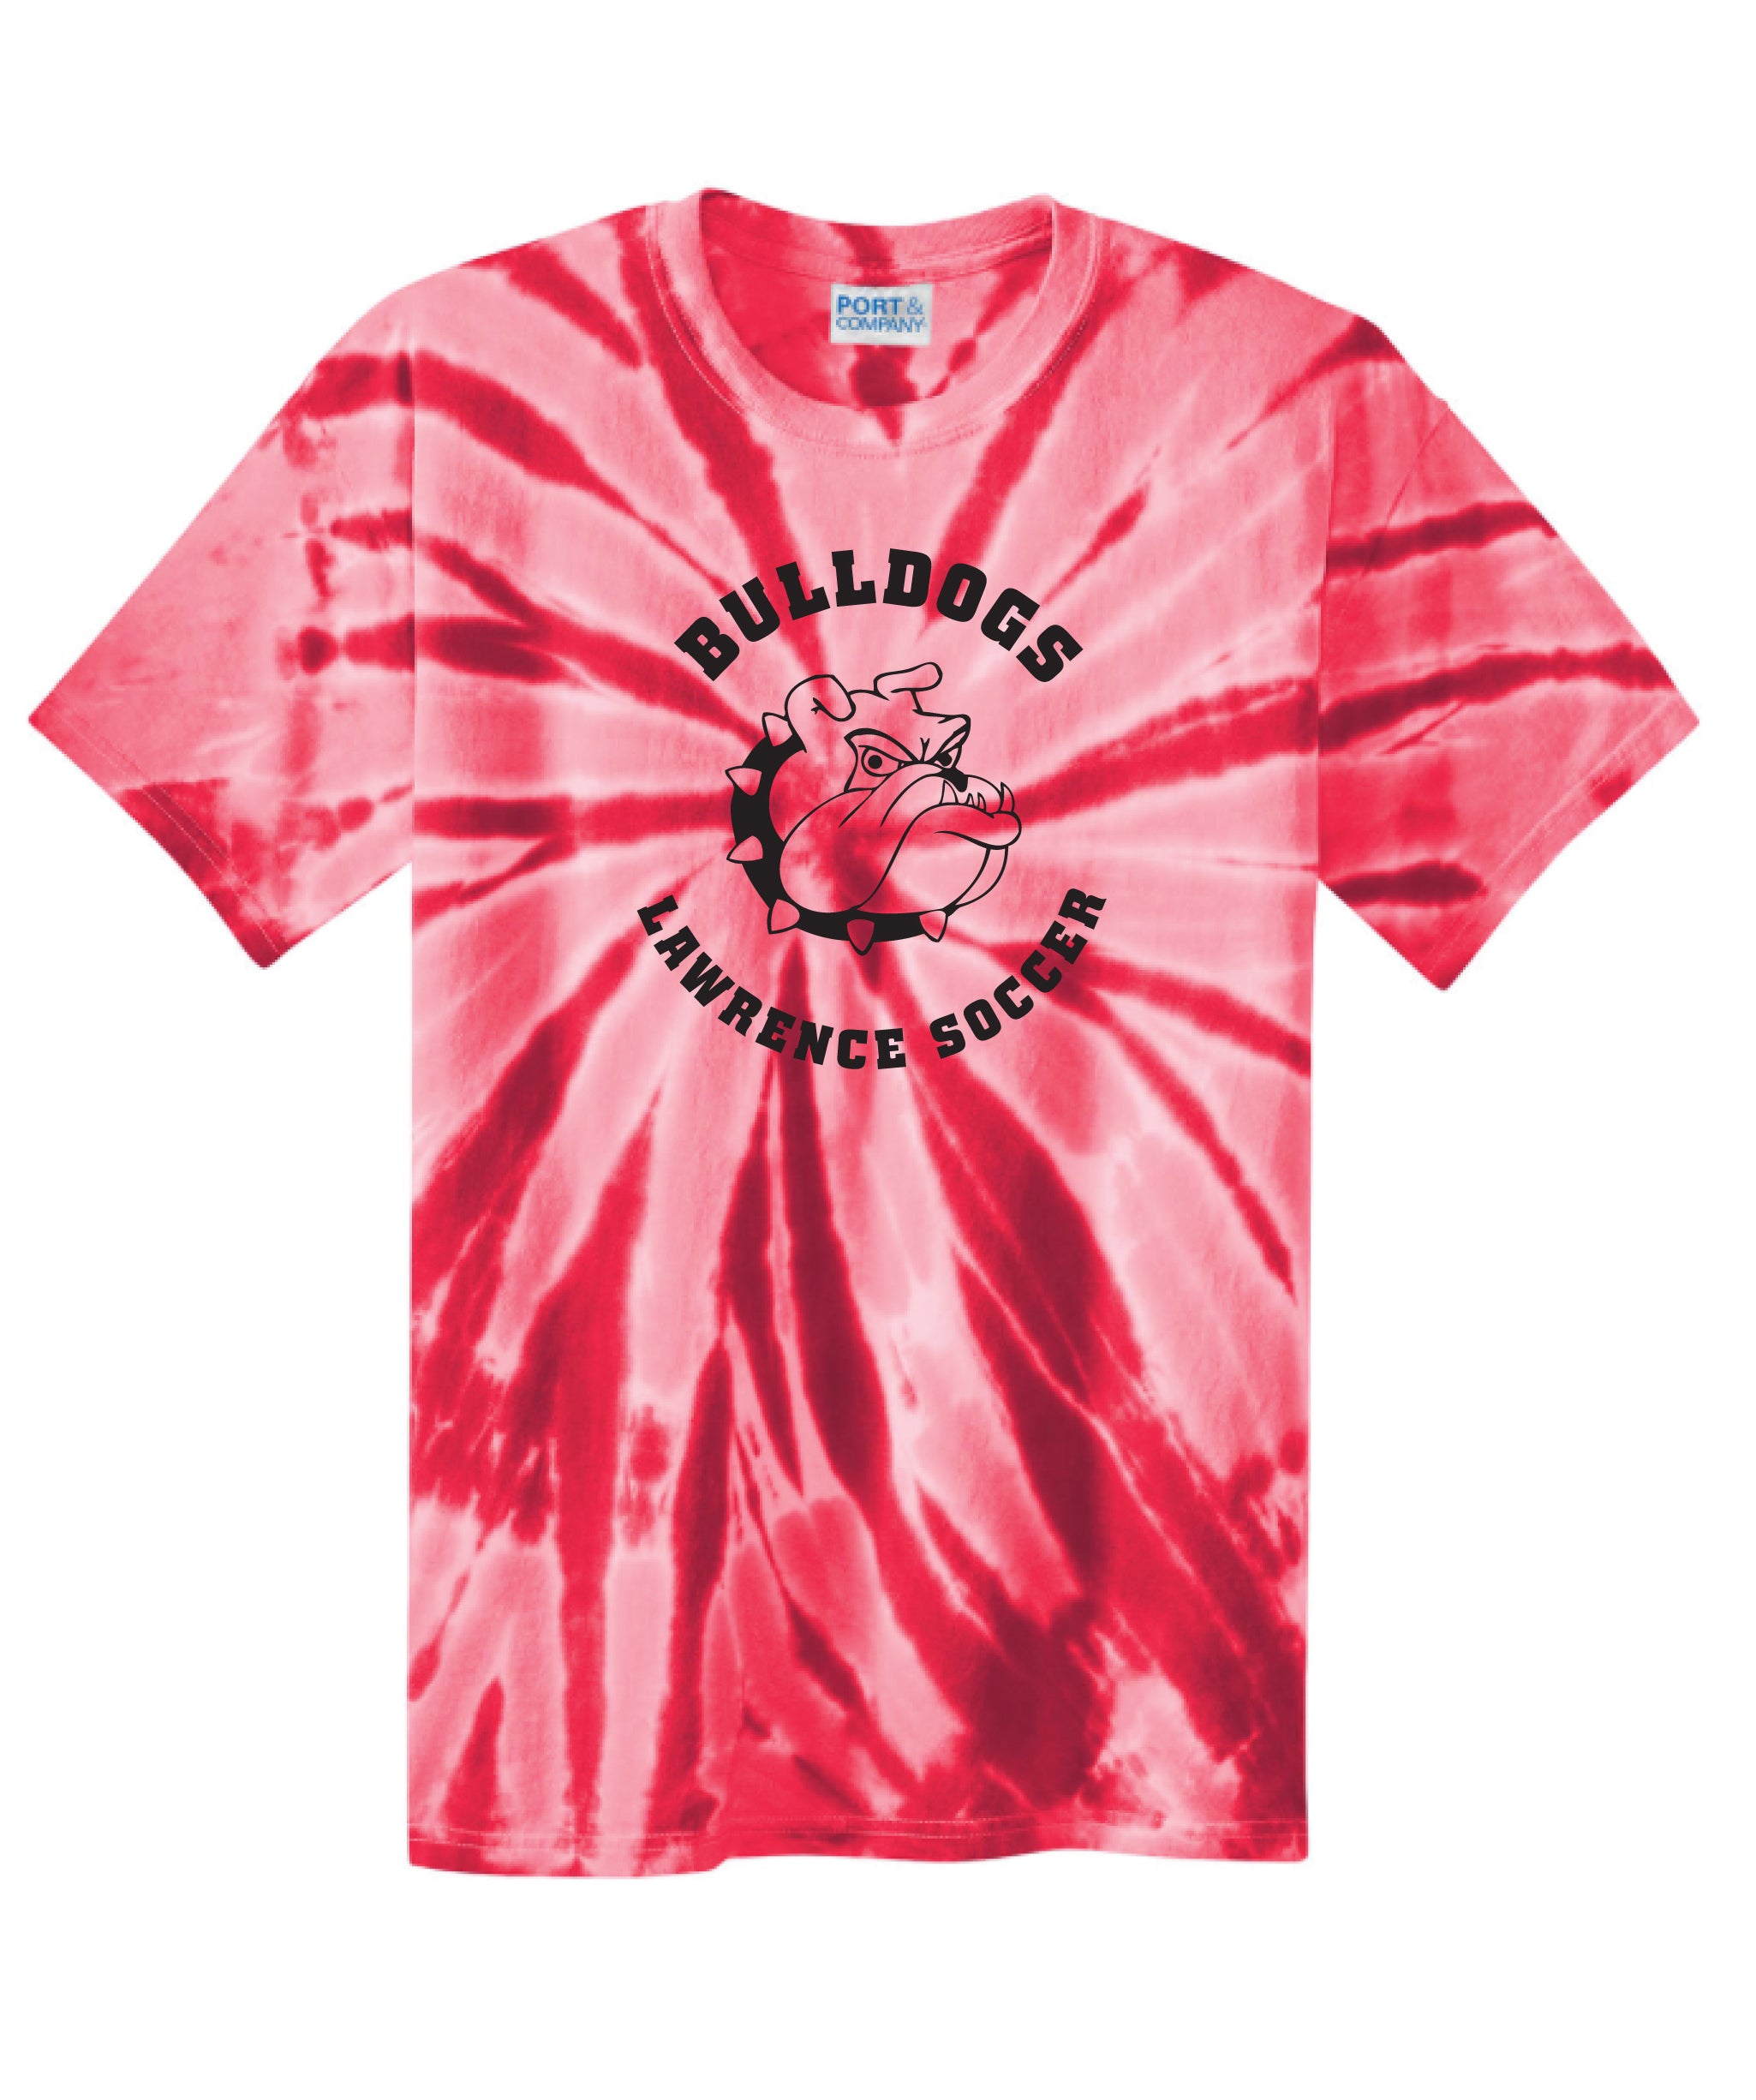 Bulldogs Red Tie-Dye T-Shirt - Adult and Youth